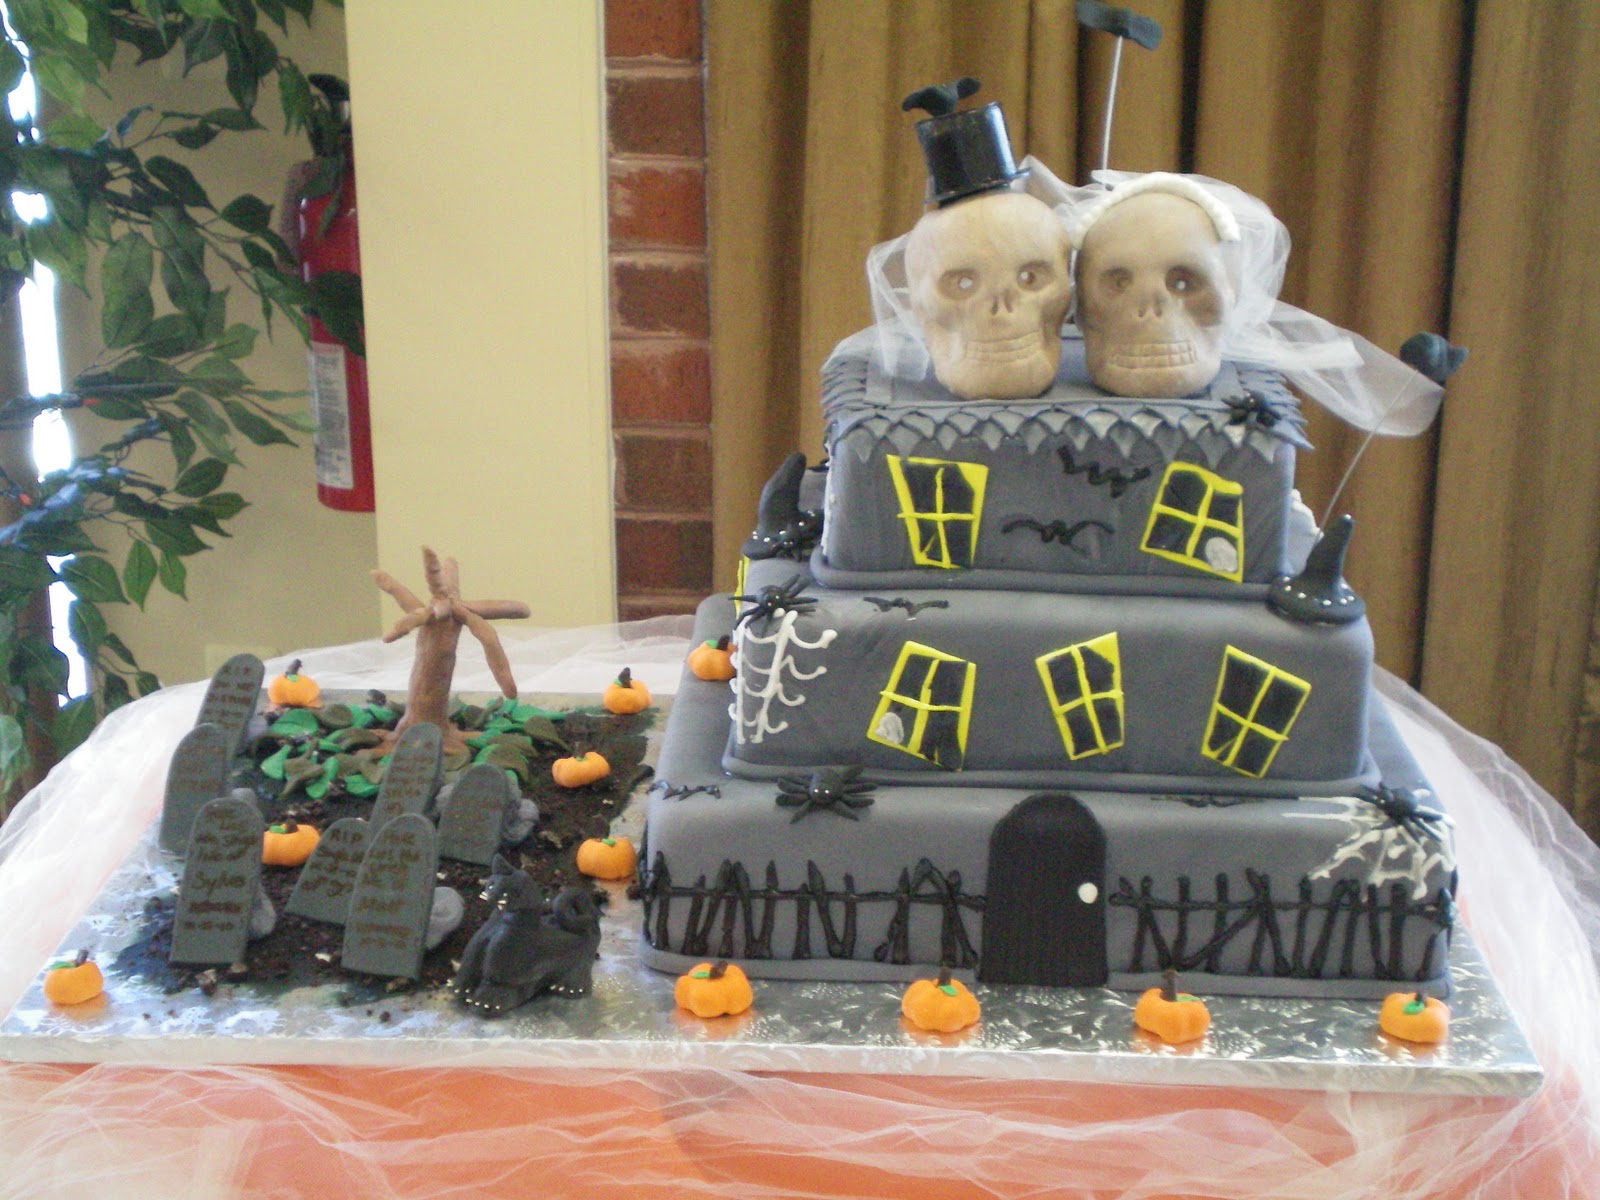 Behind the scenes at Cakes  by Happy Eatery Haunted House  